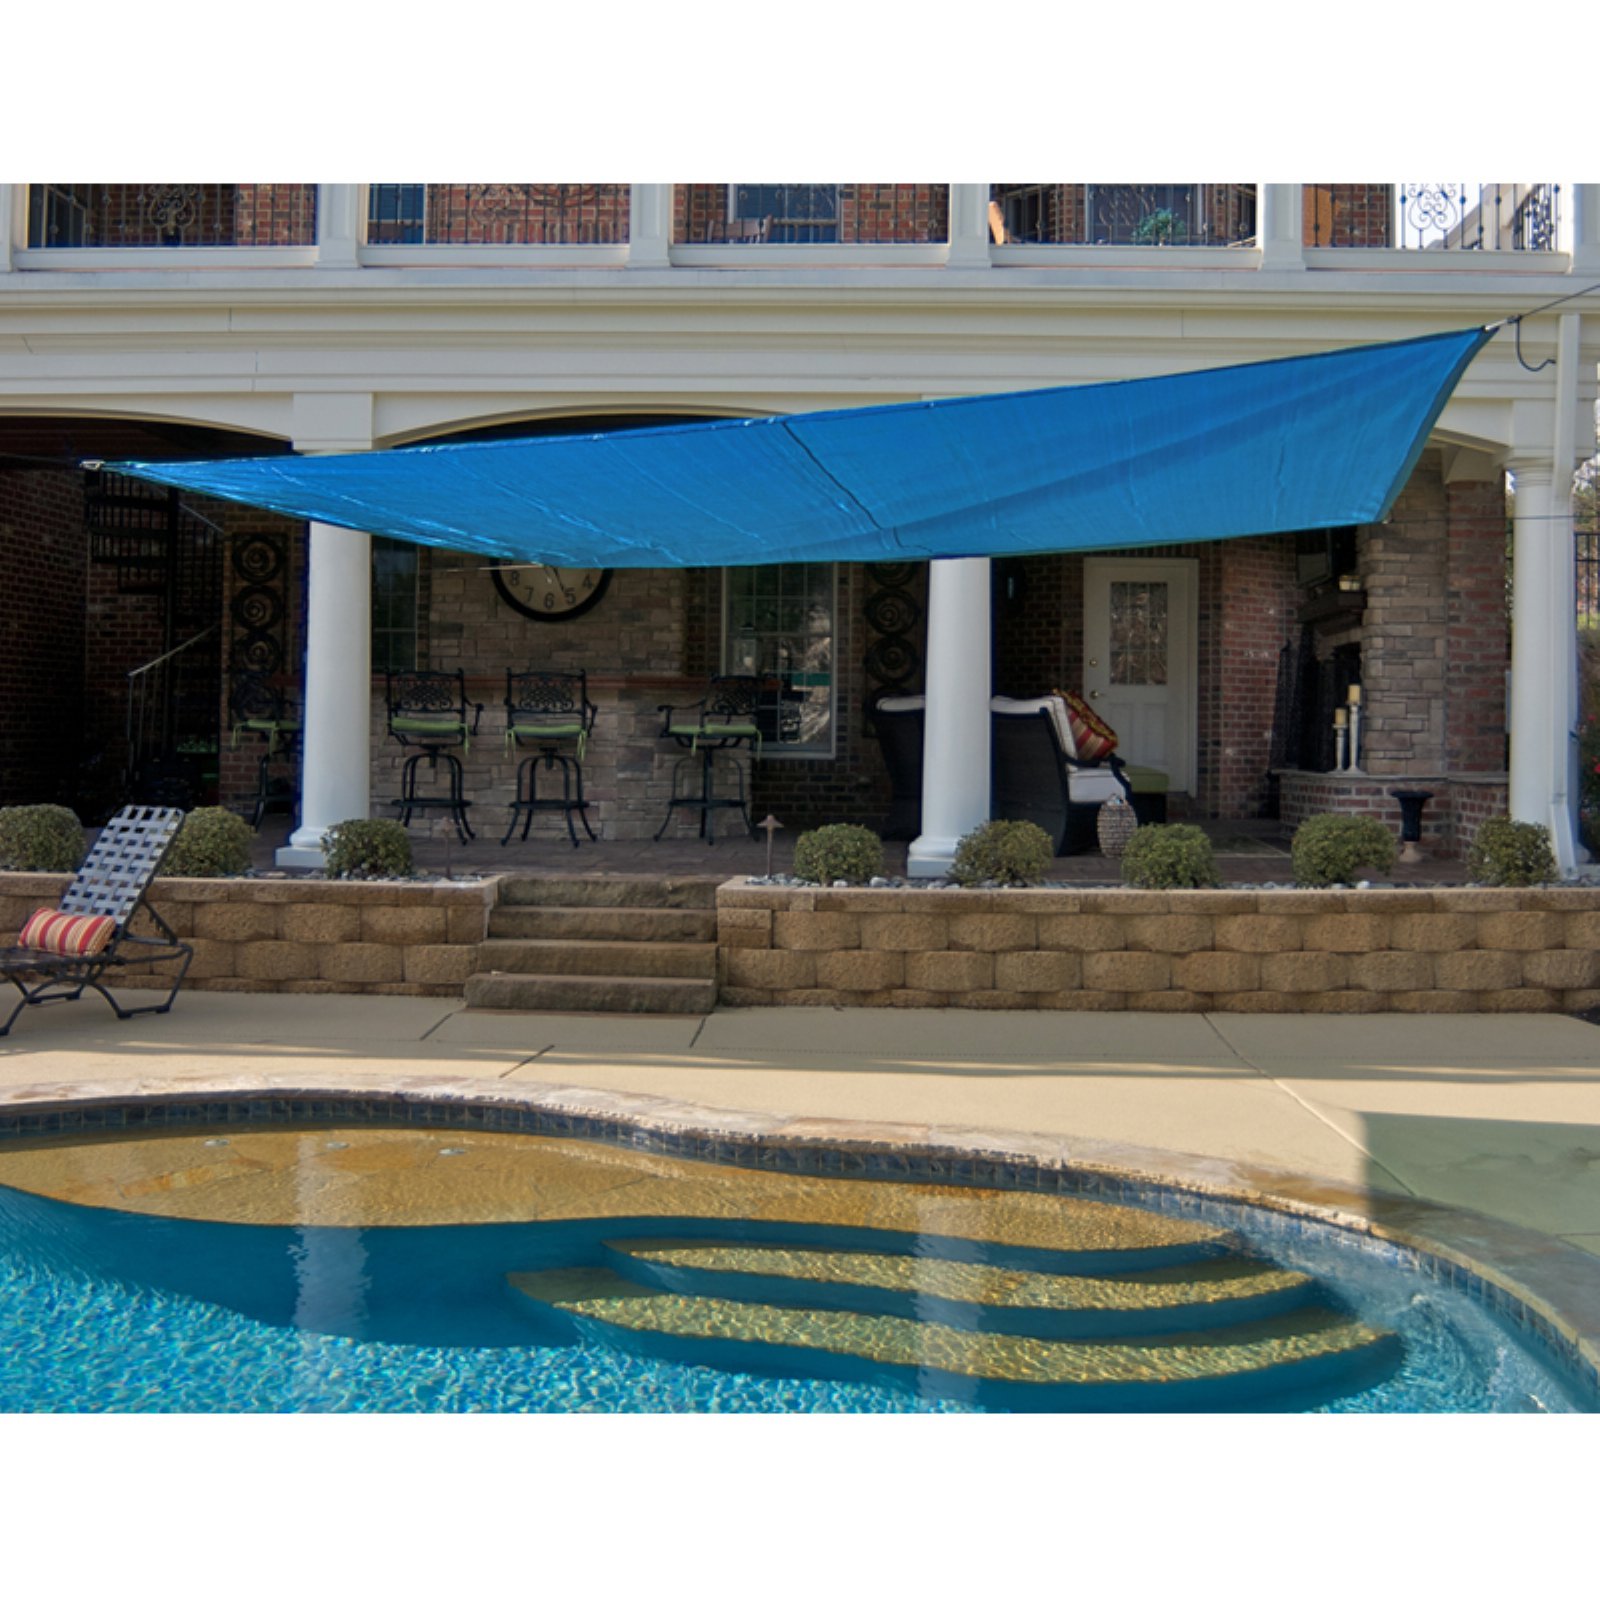 King Canopy 10' Triangle Sun Shade Sail in Green - image 2 of 8